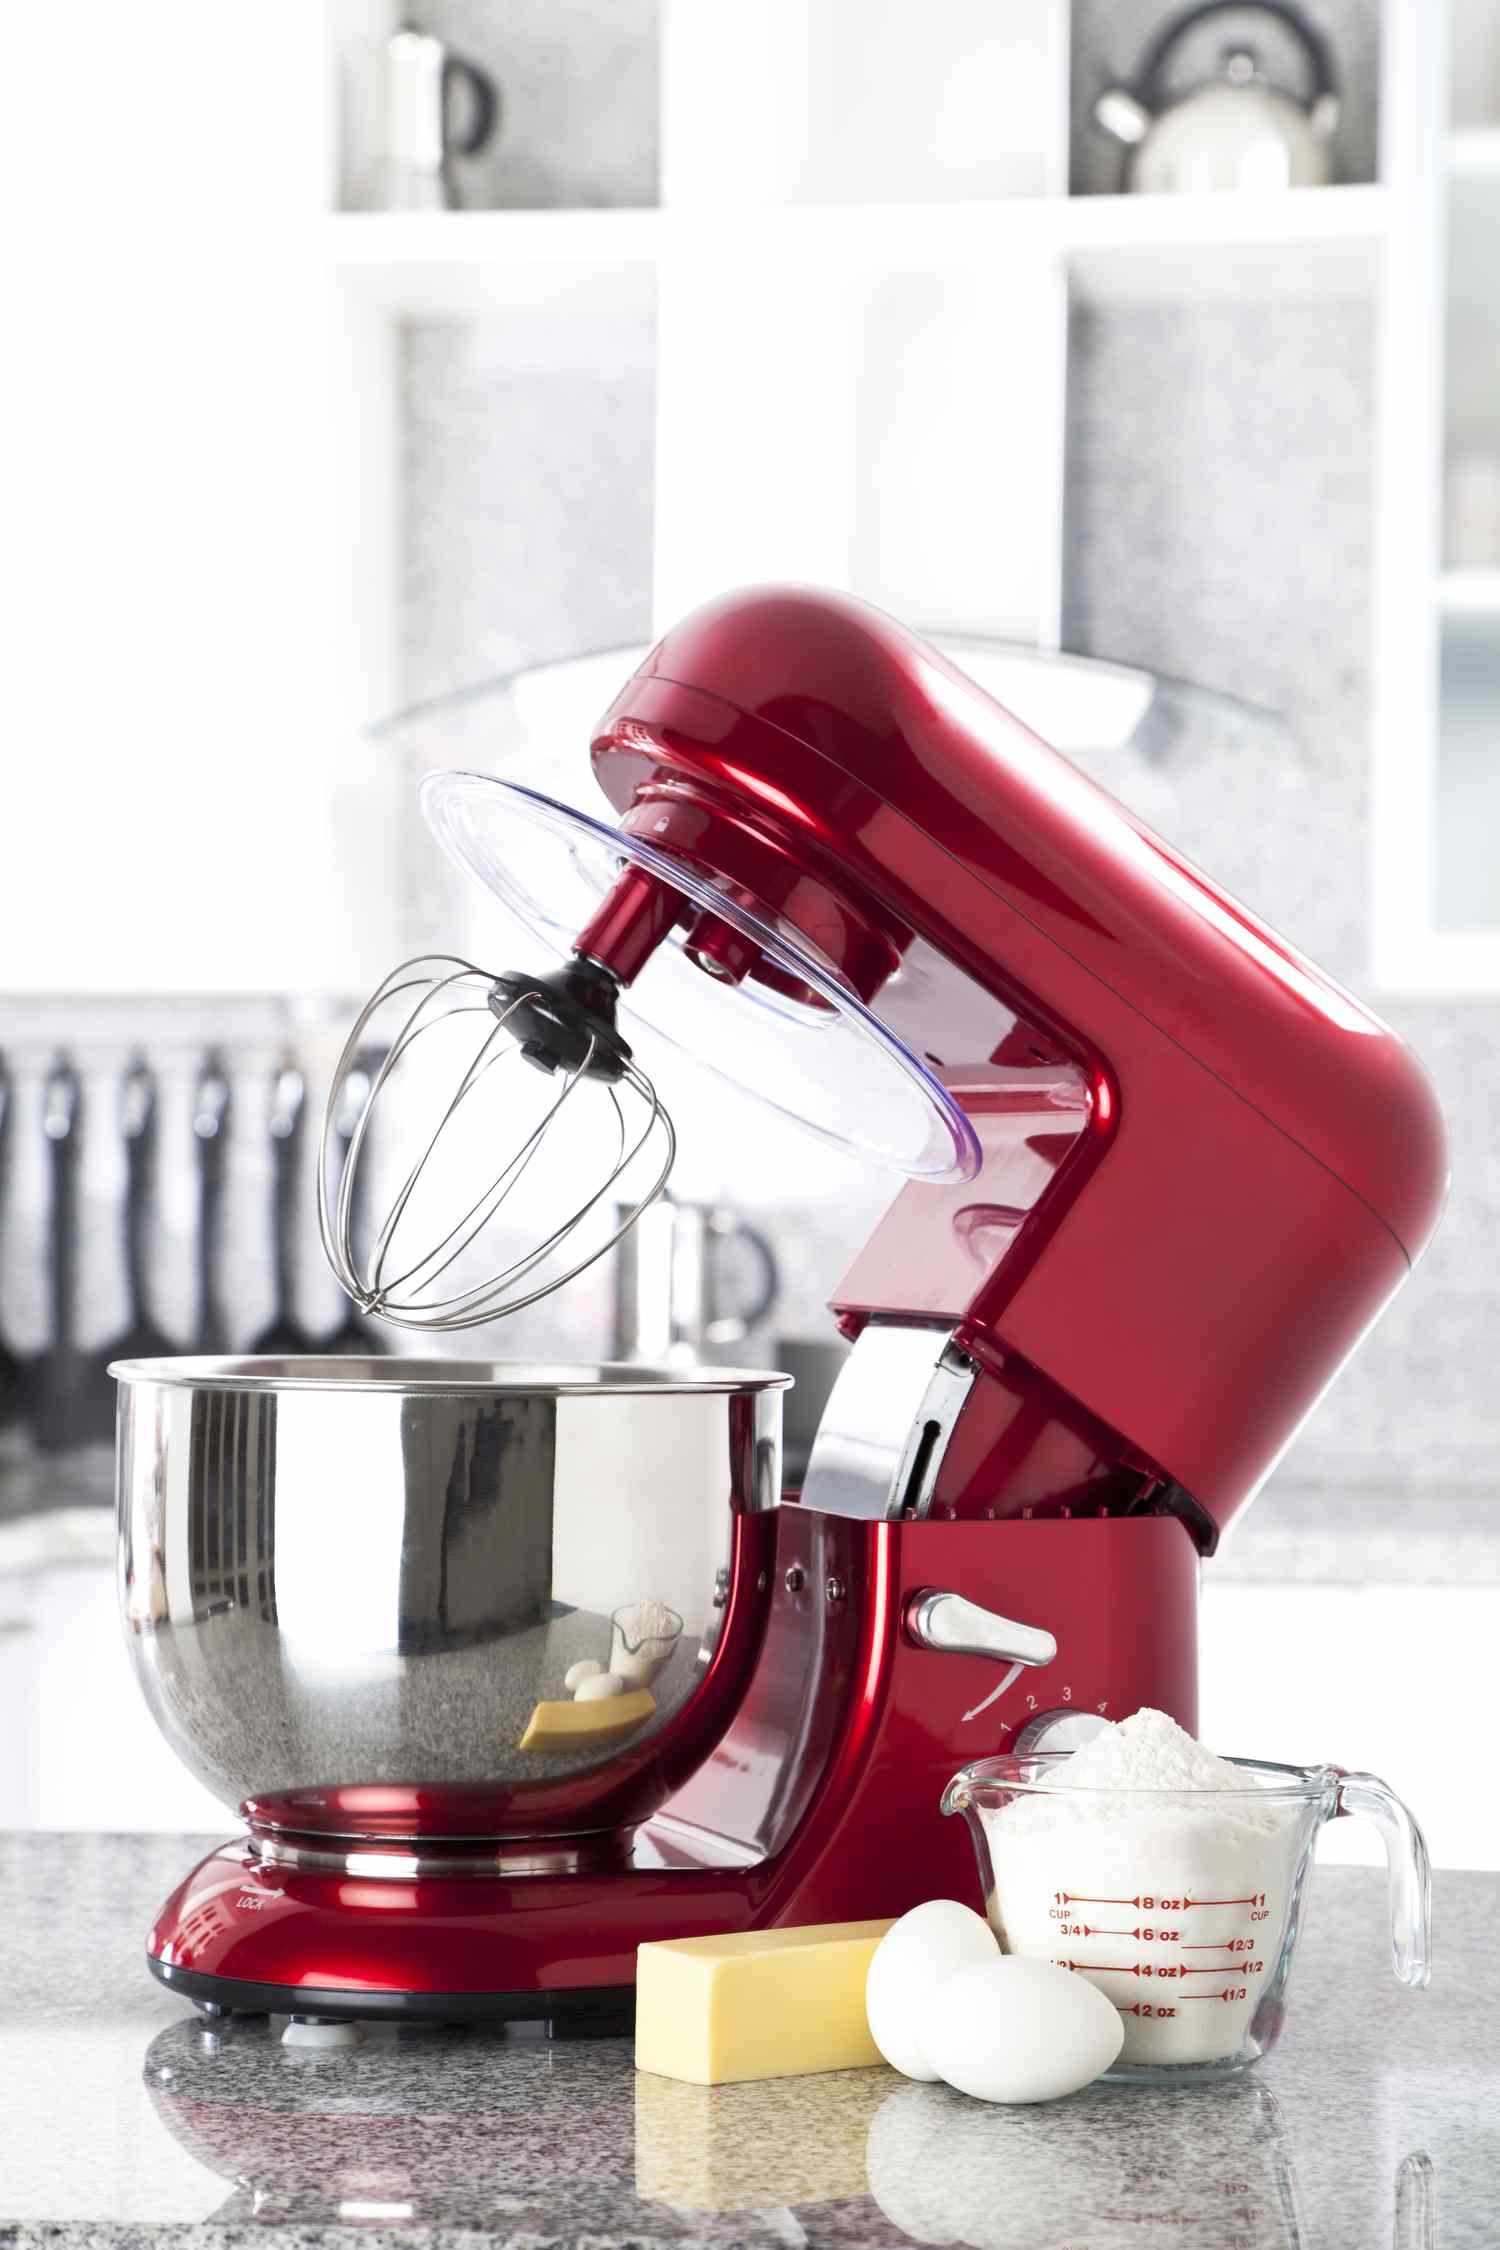 Hand mixer vs stand mixer which should you buy